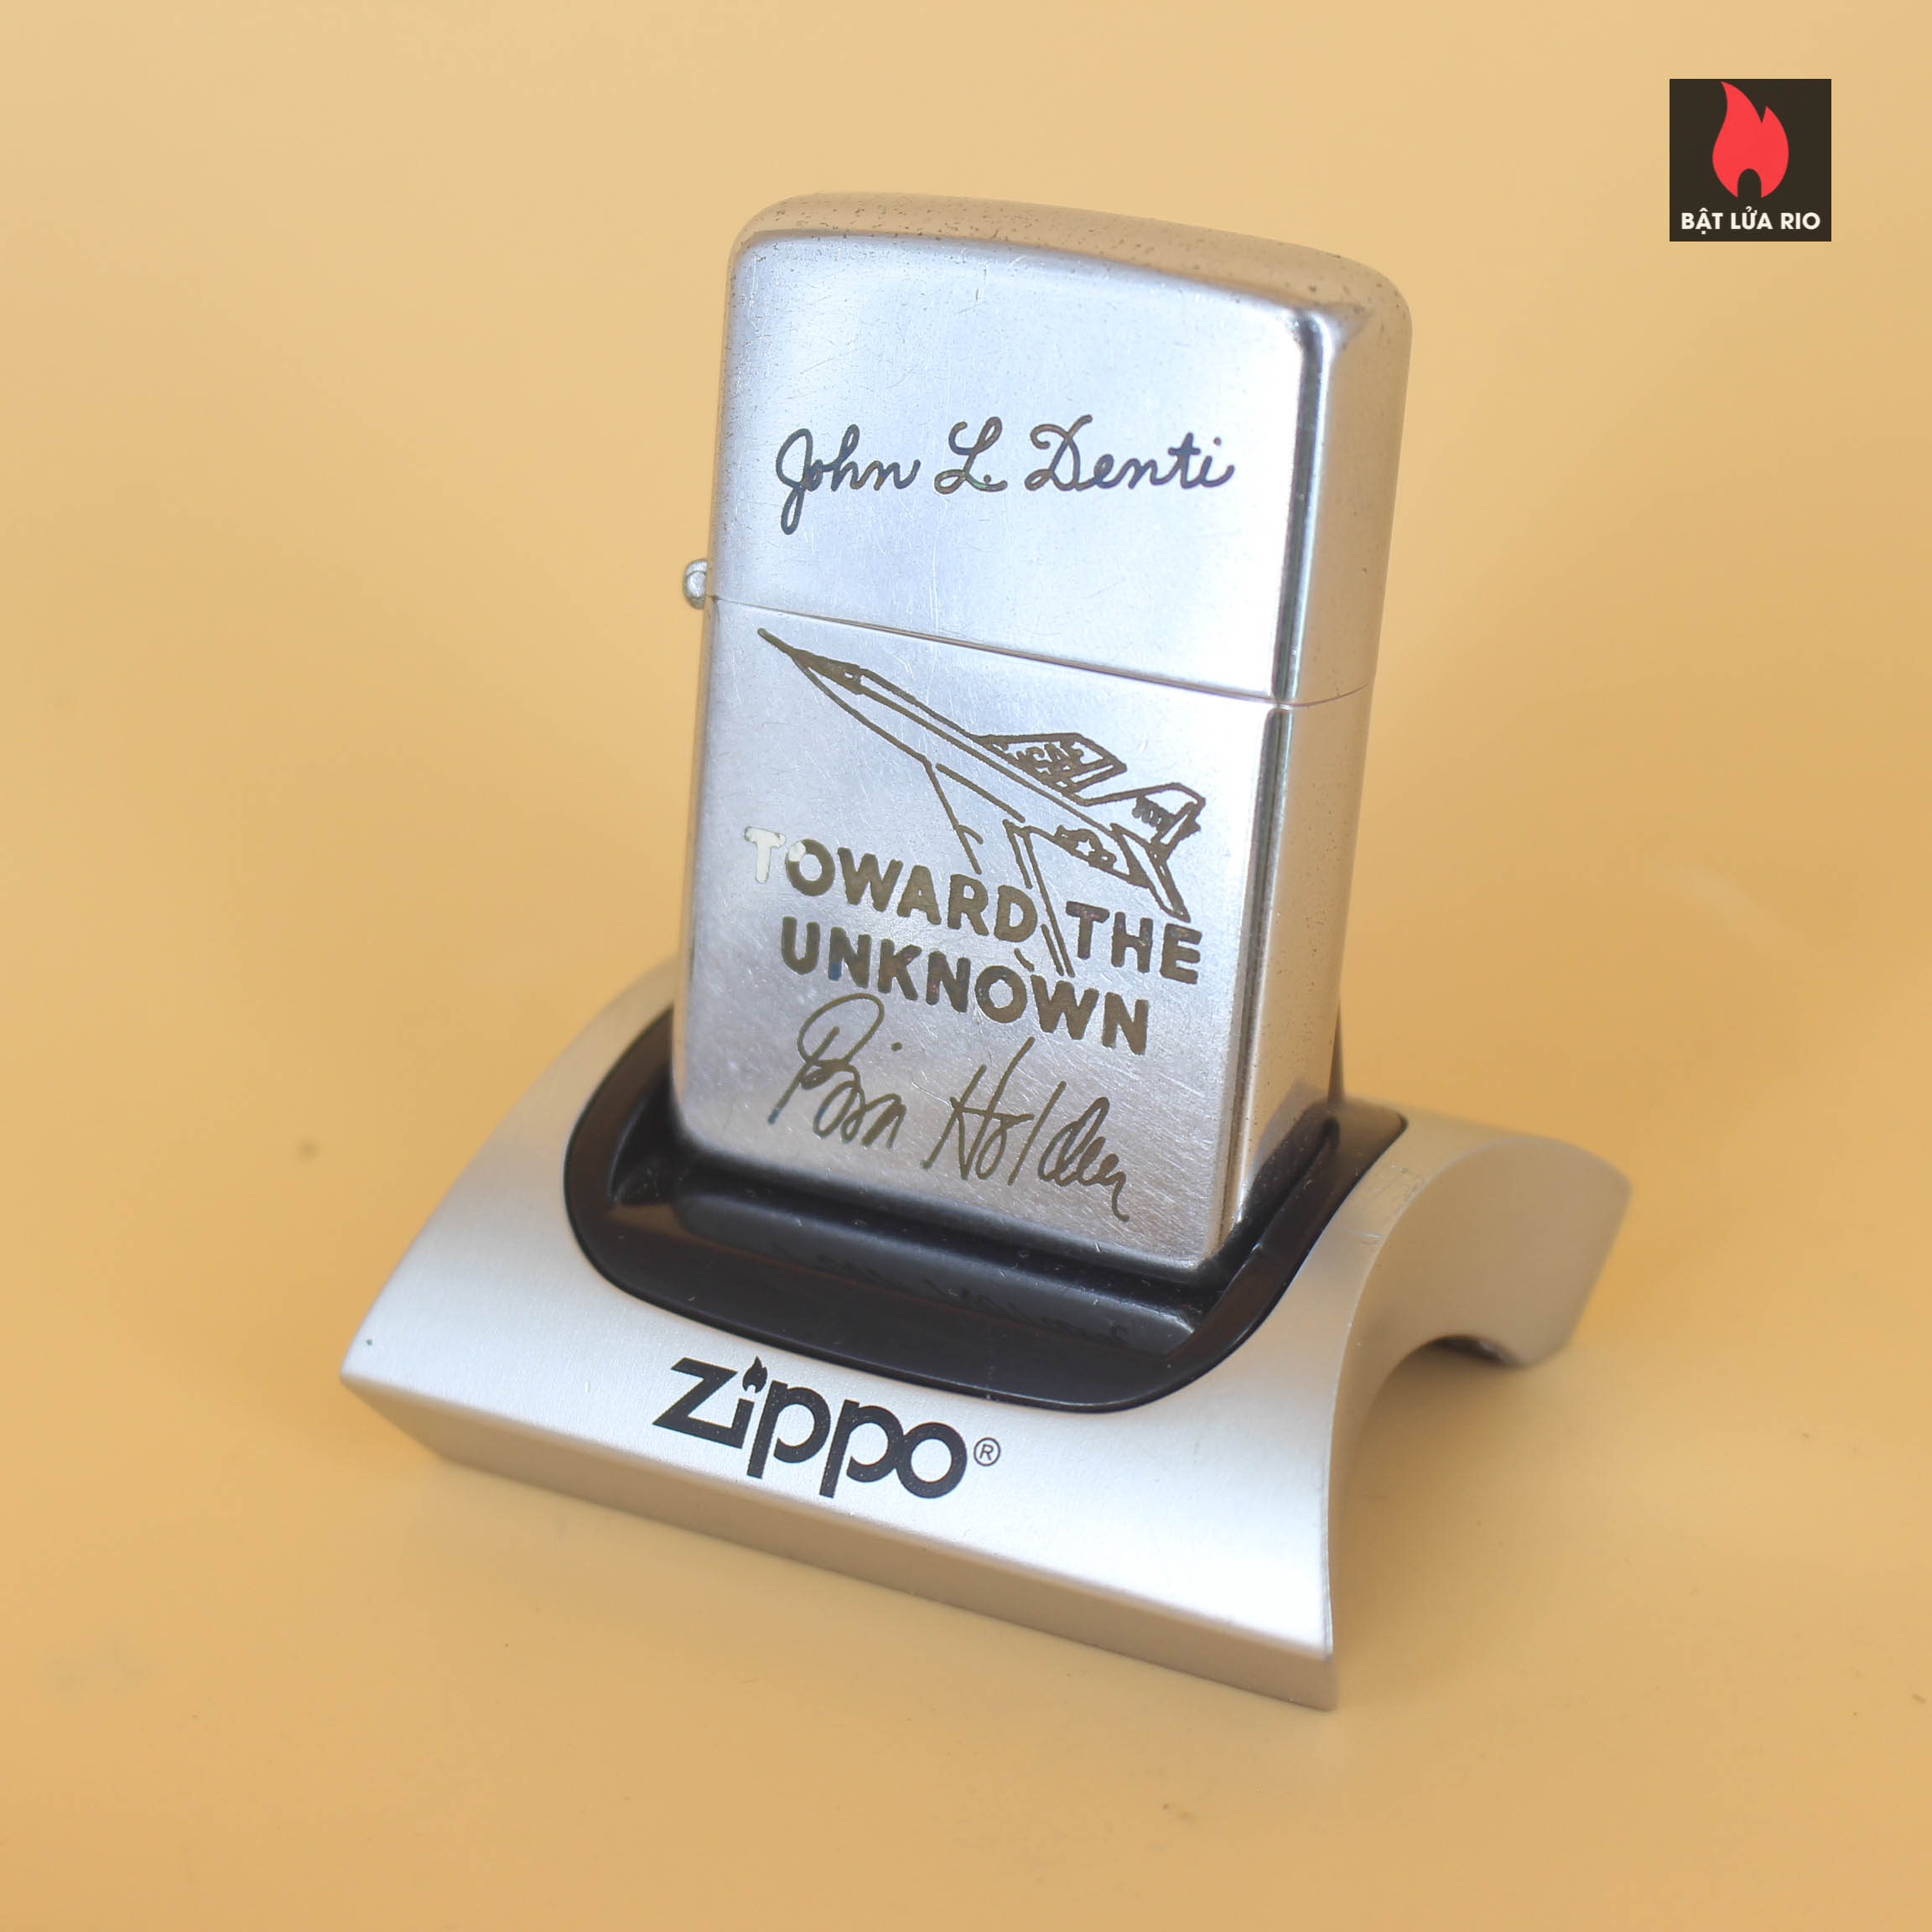 Zippo Xưa 1956 – Zippo lighter given to John L.Denti by Bill Holden - Star Of The Movie Toward the Unknown 1